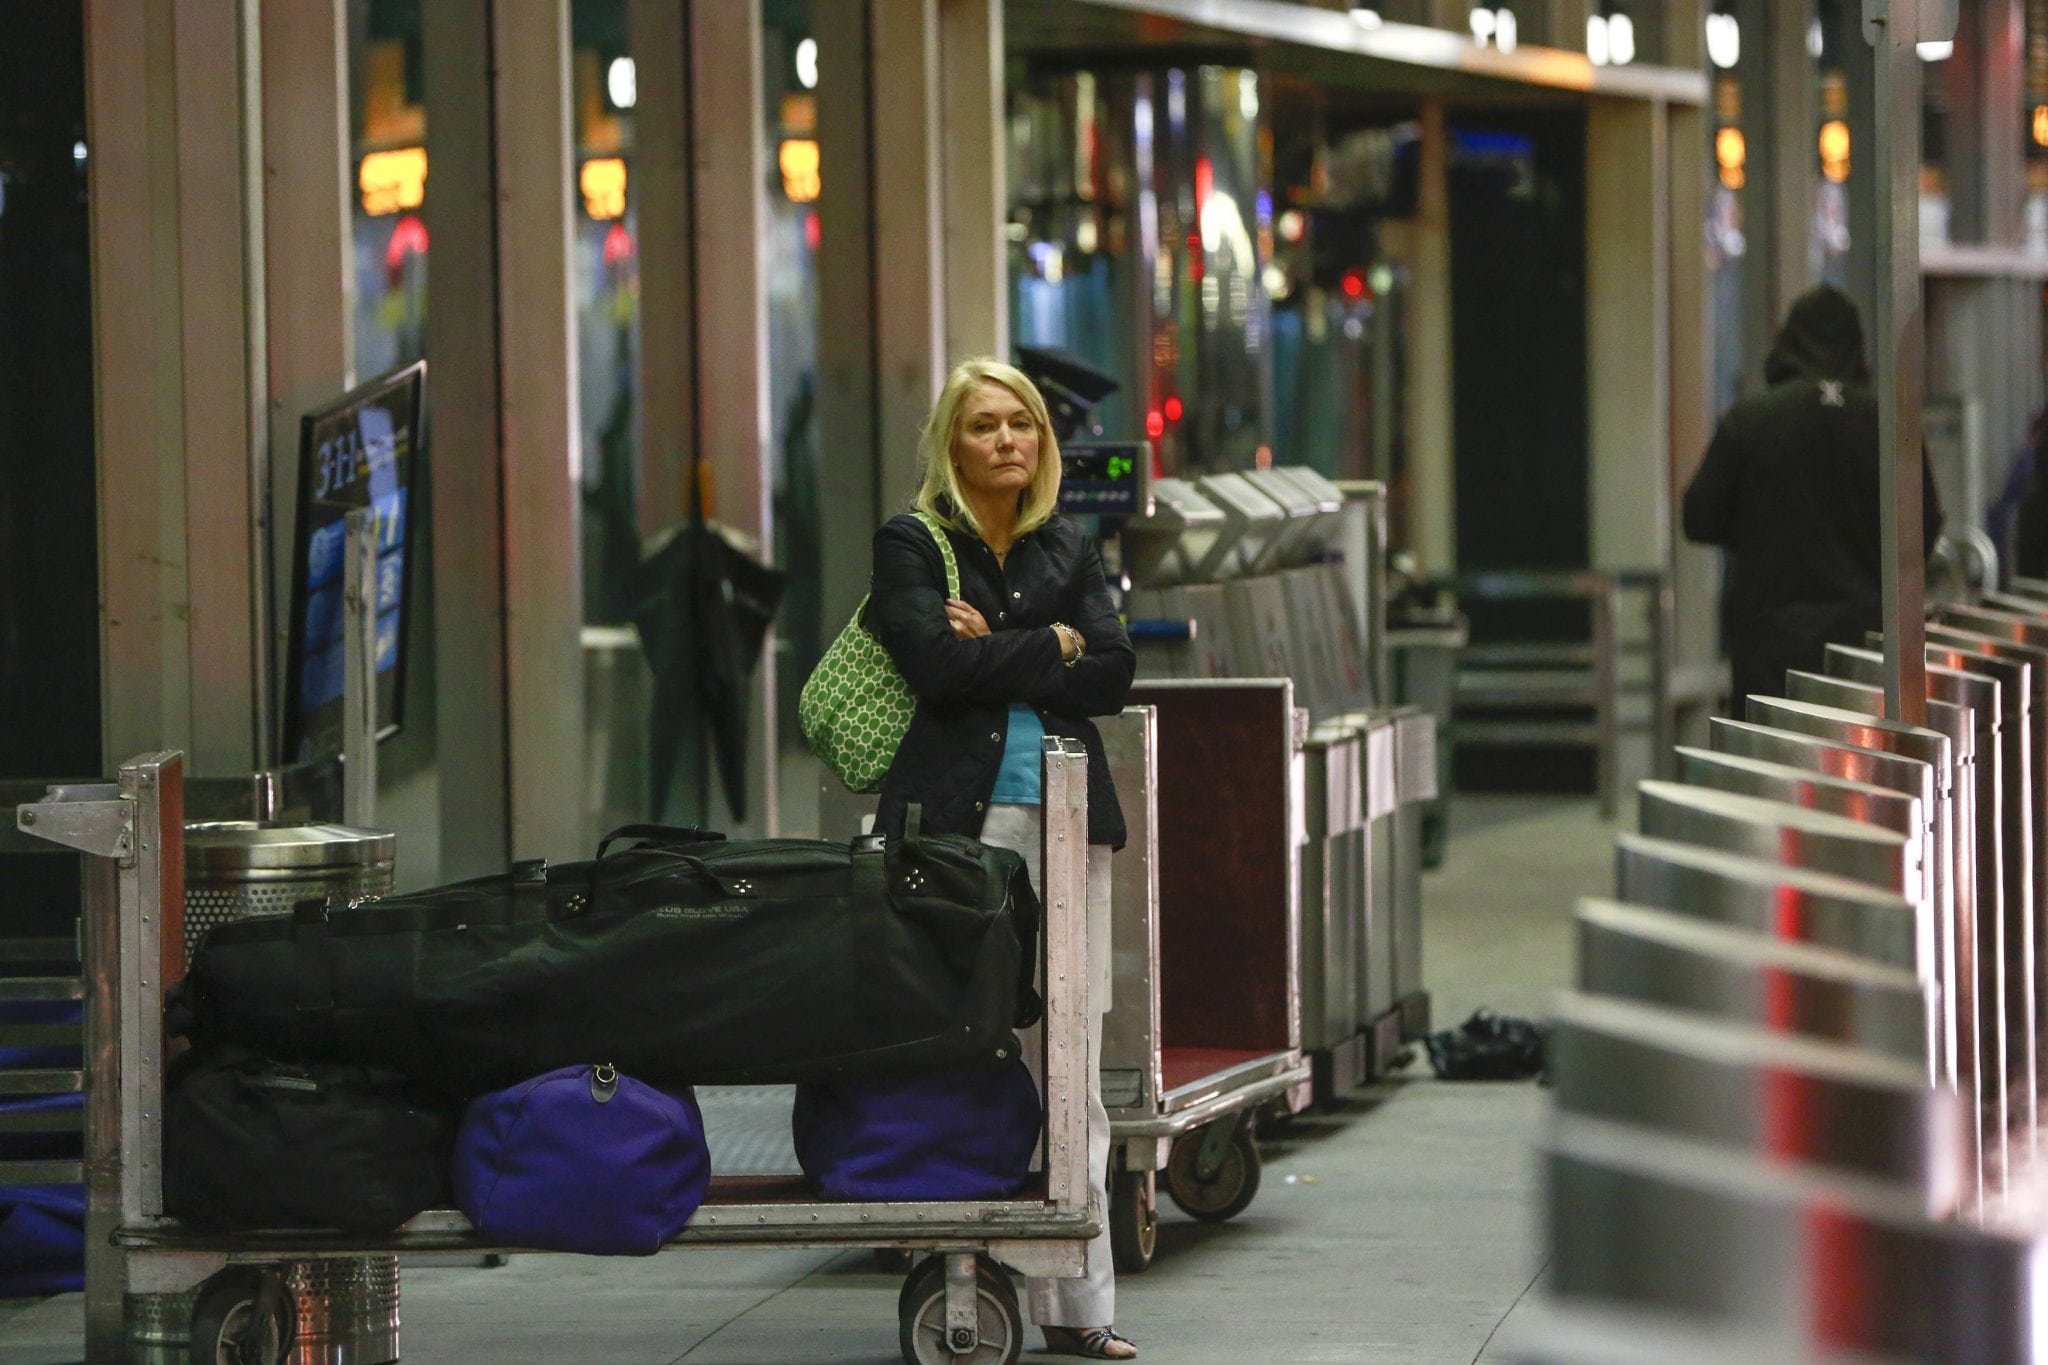 A woman waits with her luggage at a check-in area at LaGuardia Airport in New York, November 26, 2013. 